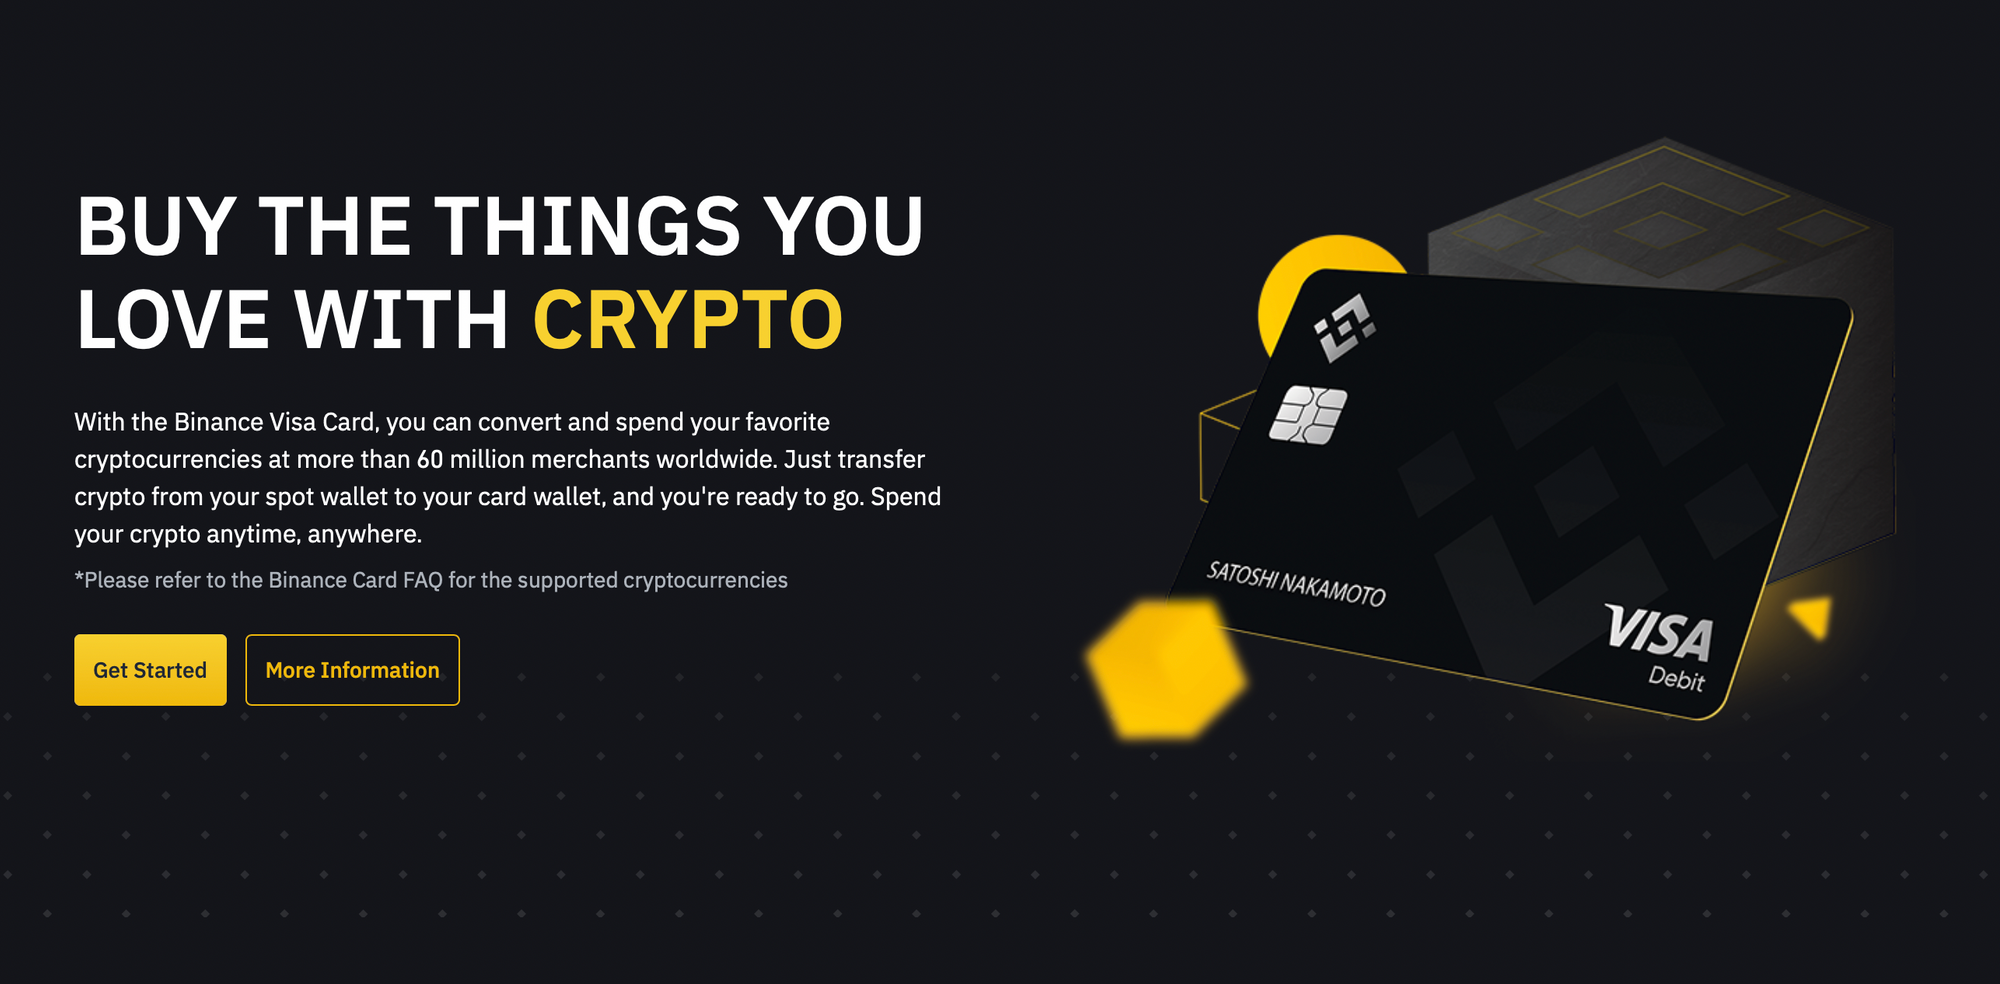 Binance Card is the new king of cryptocurrency cards